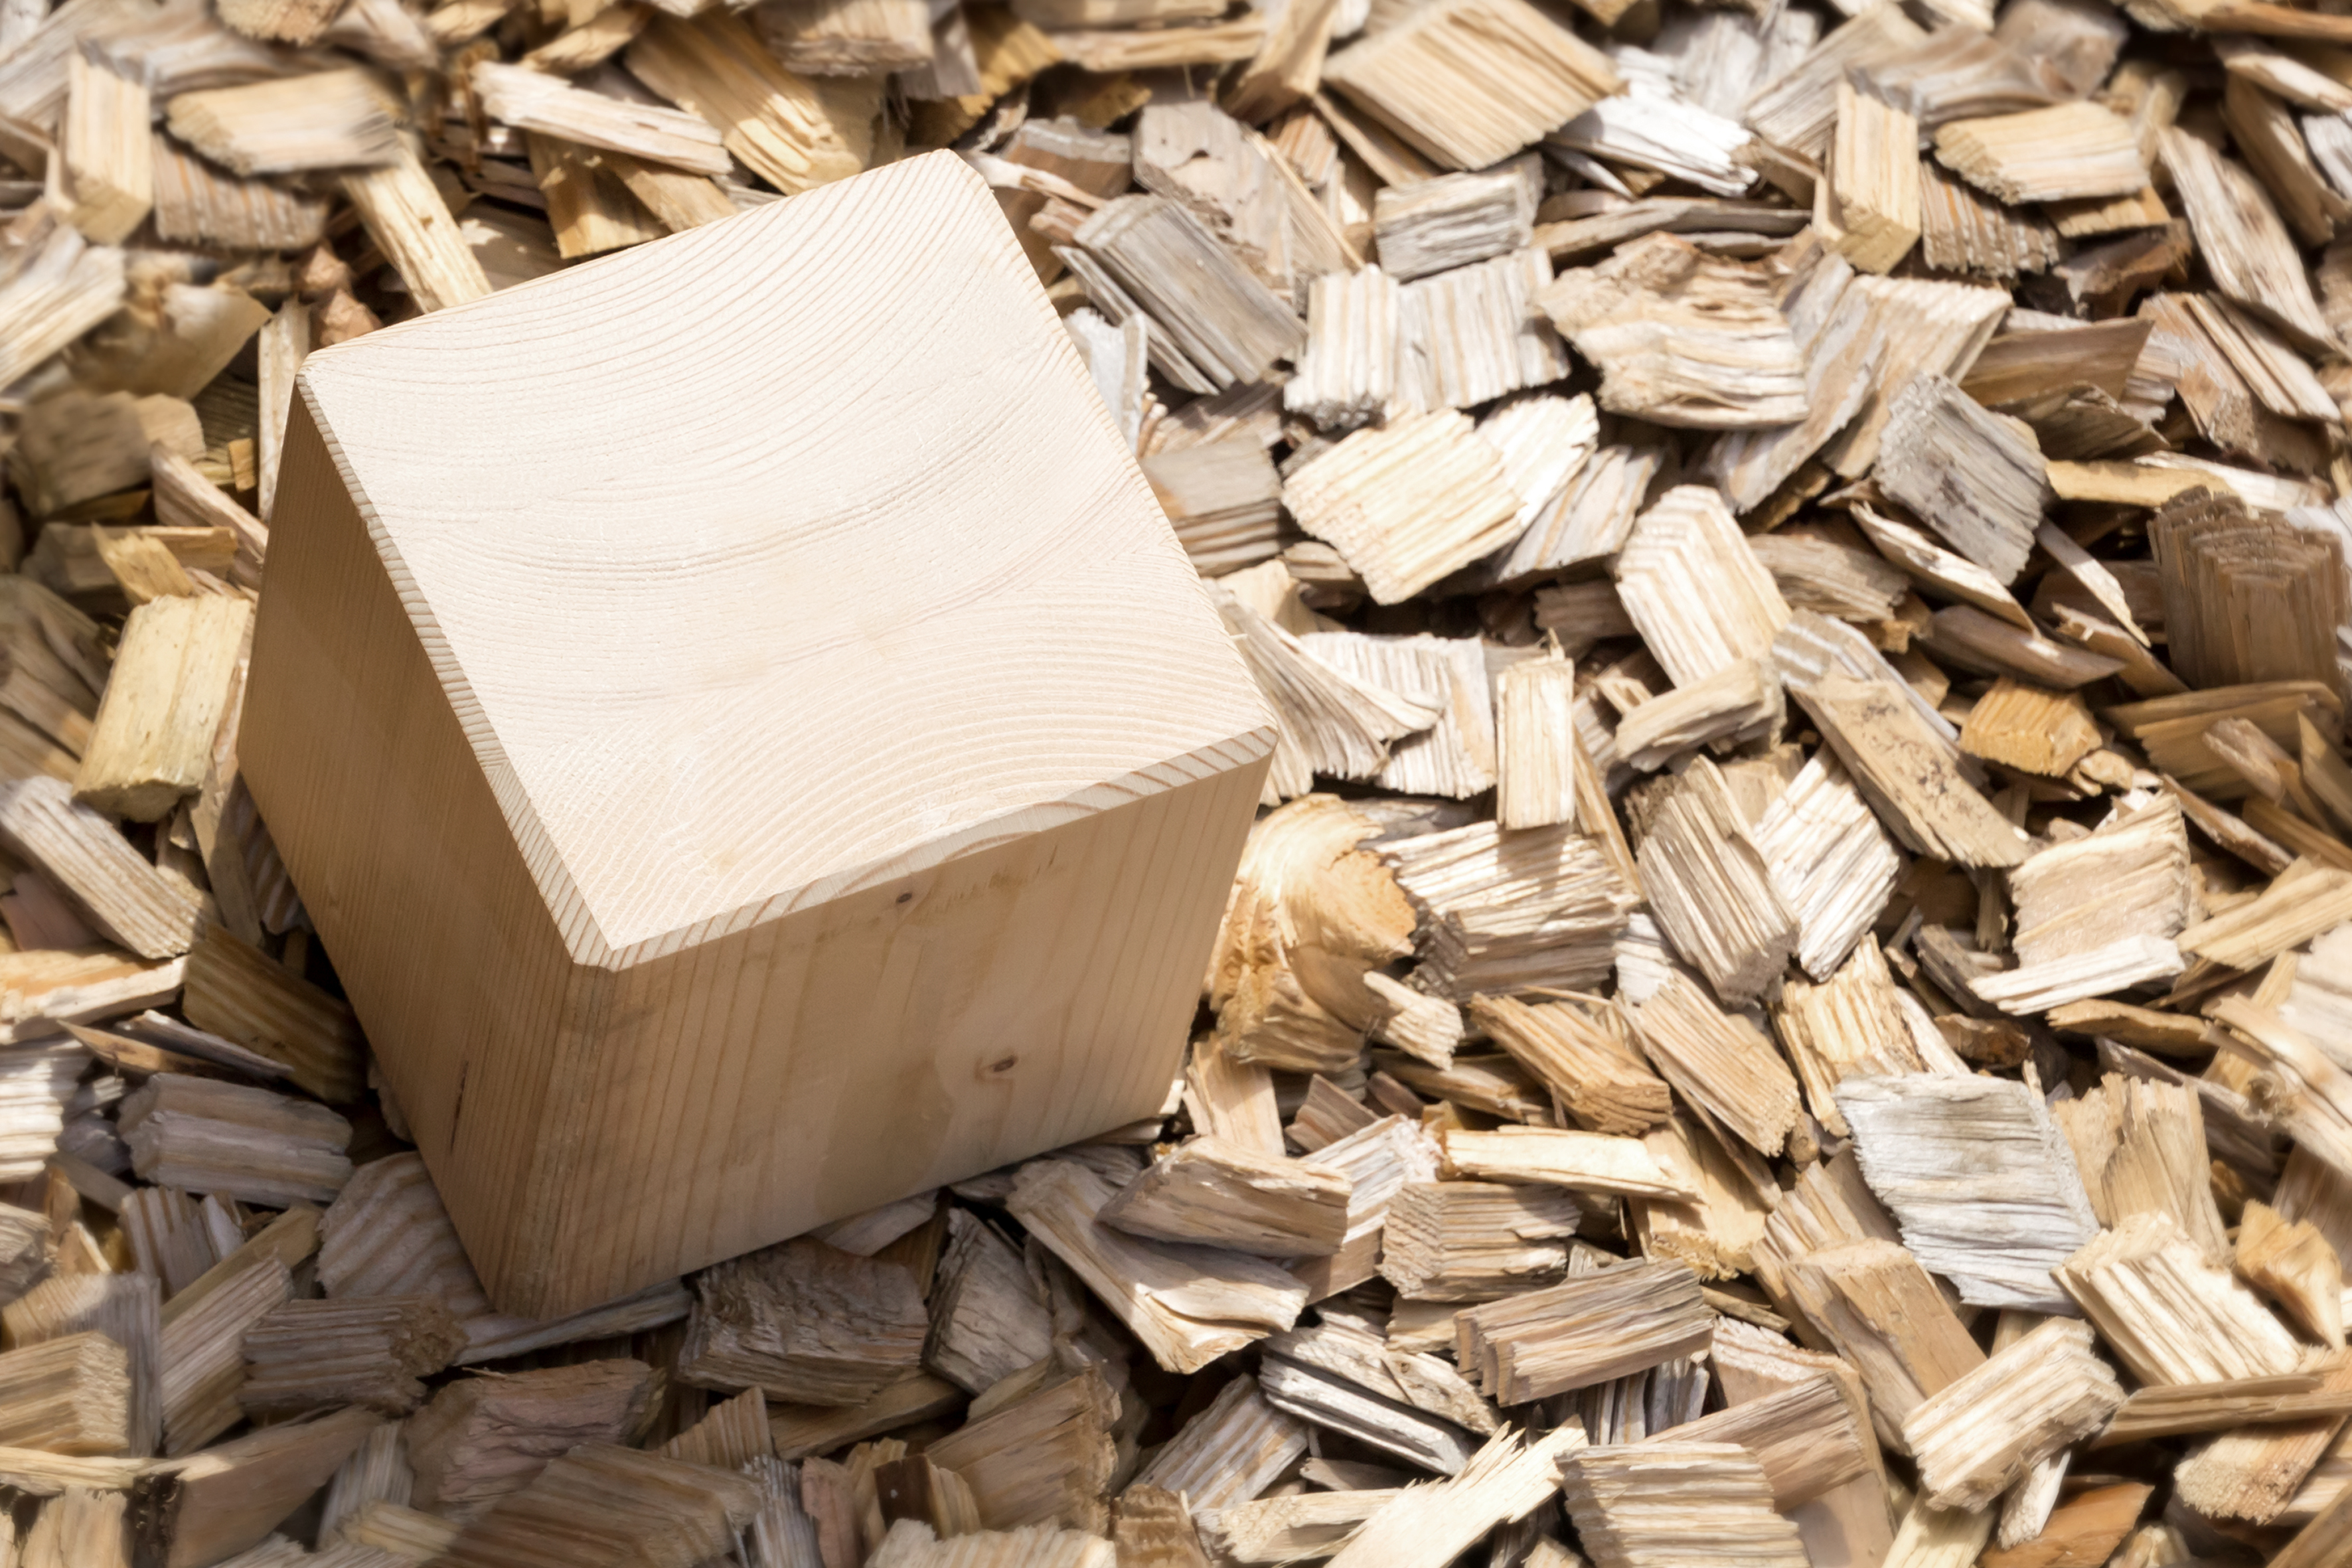 There is ongoing global market demand for balsa wood.